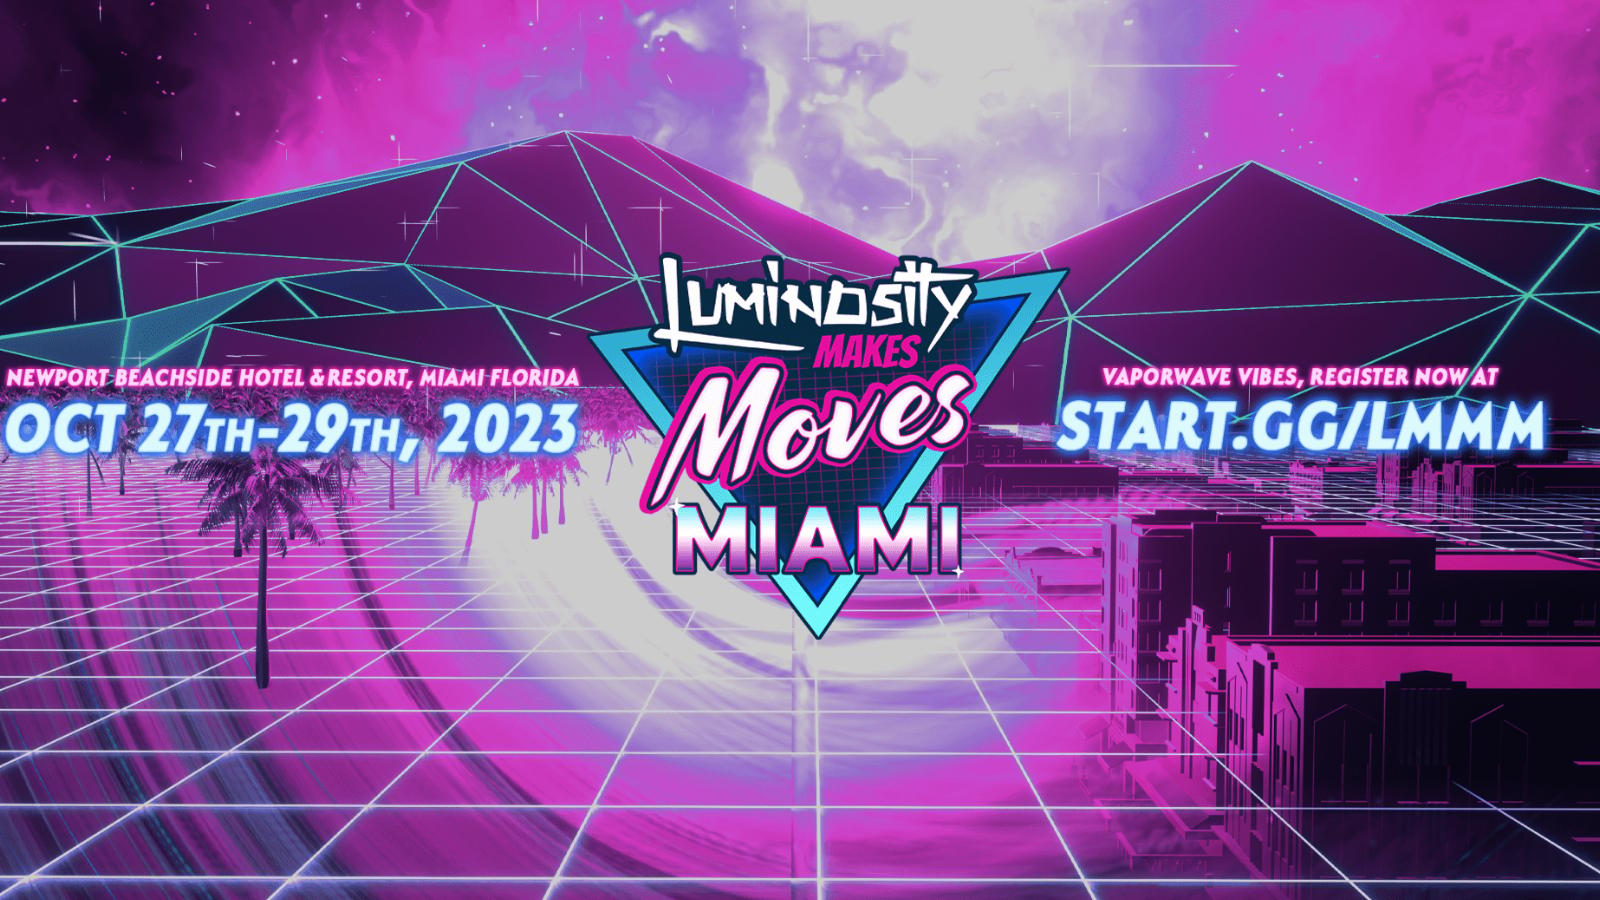 Luminosity Makes Moves Miami smash ultimate details